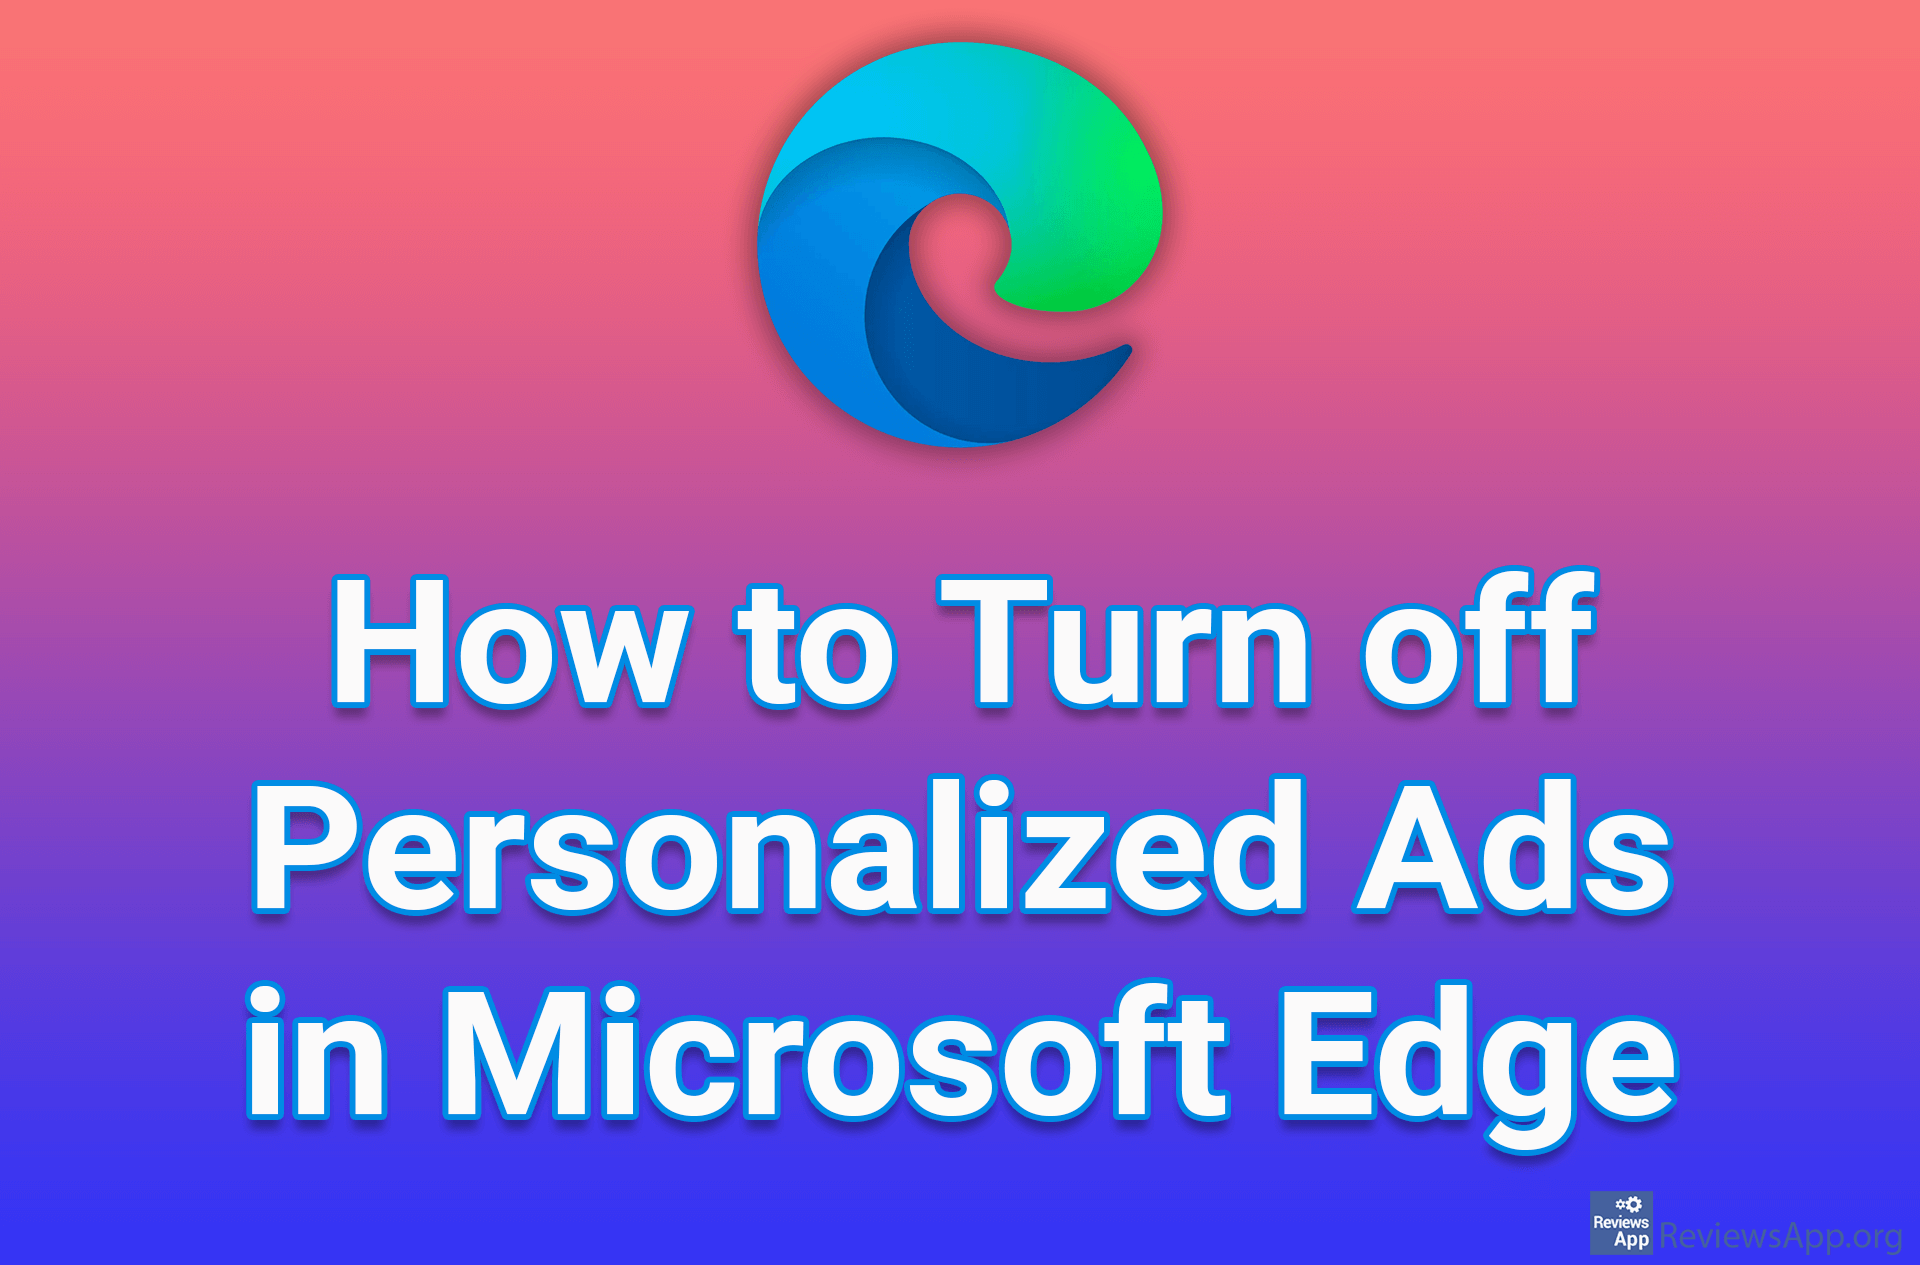 How to Turn off Personalized Ads in Microsoft Edge